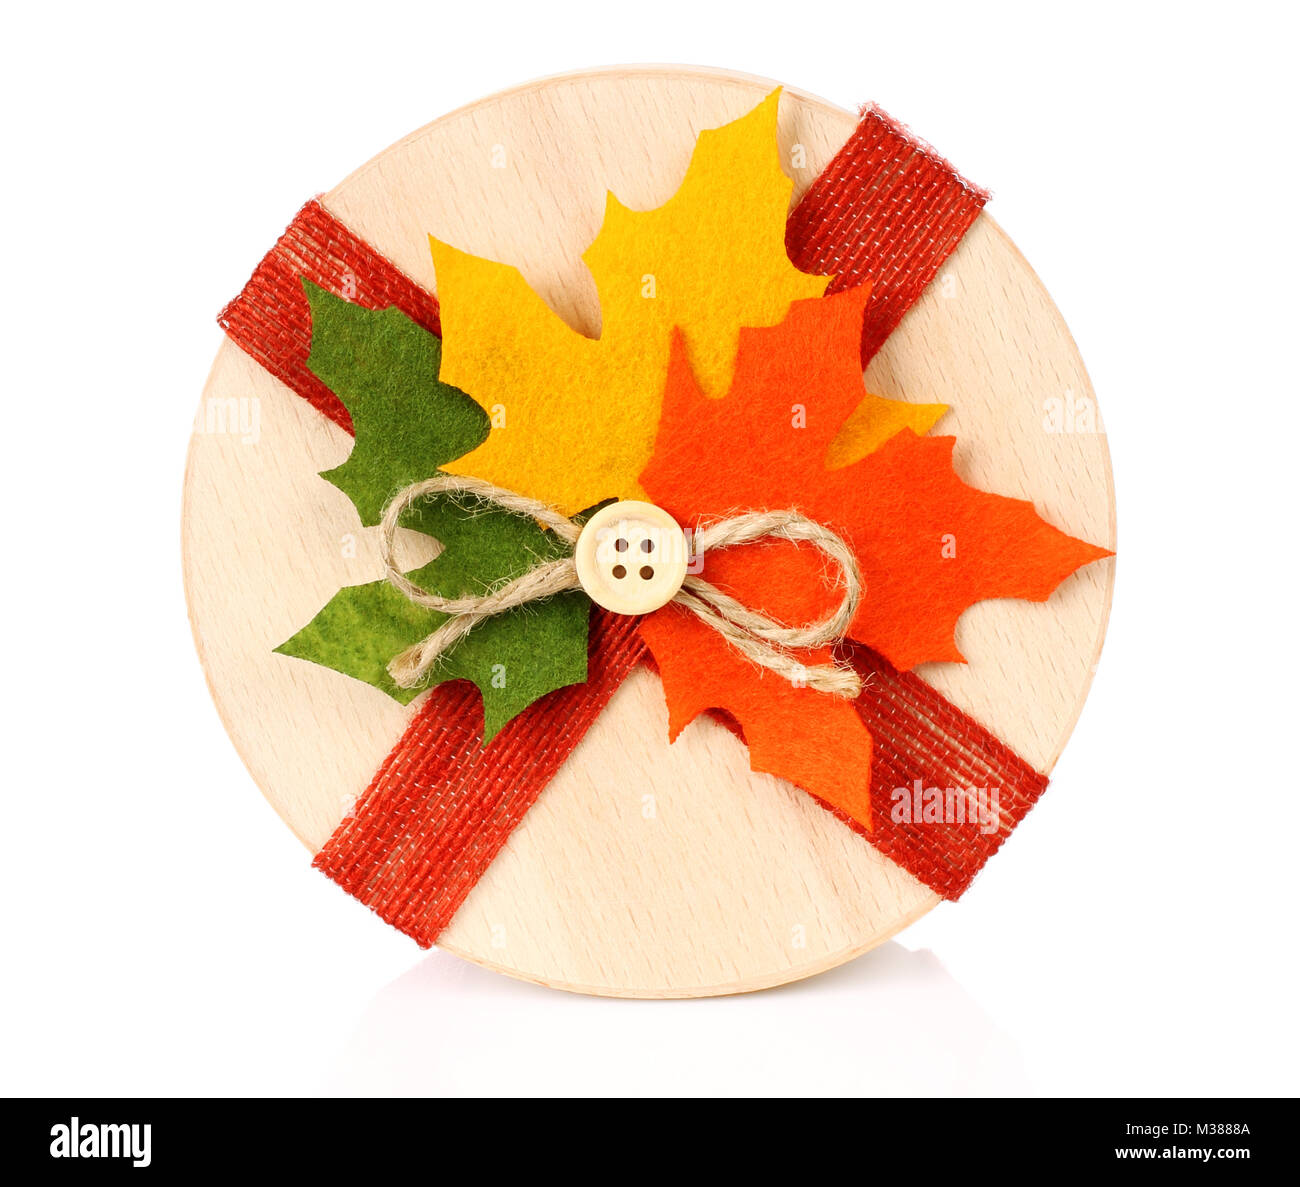 Autumn concept of present box with dried leaves on white backround Stock Photo